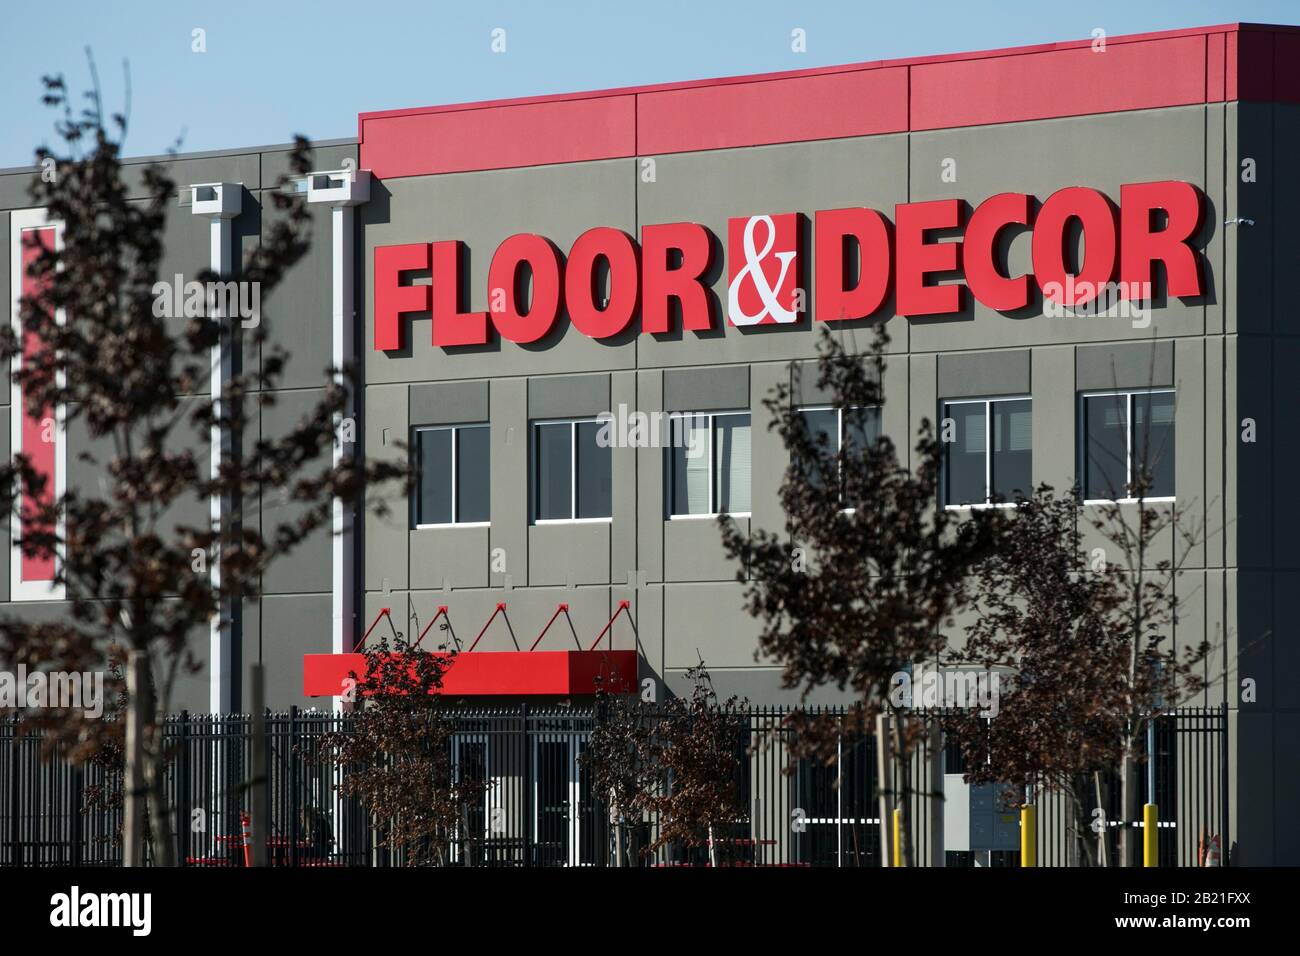 A logo sign outside of a Floor & Decor fulfillment center in Baltimore, Maryland on February 22, 2020. Stock Photo